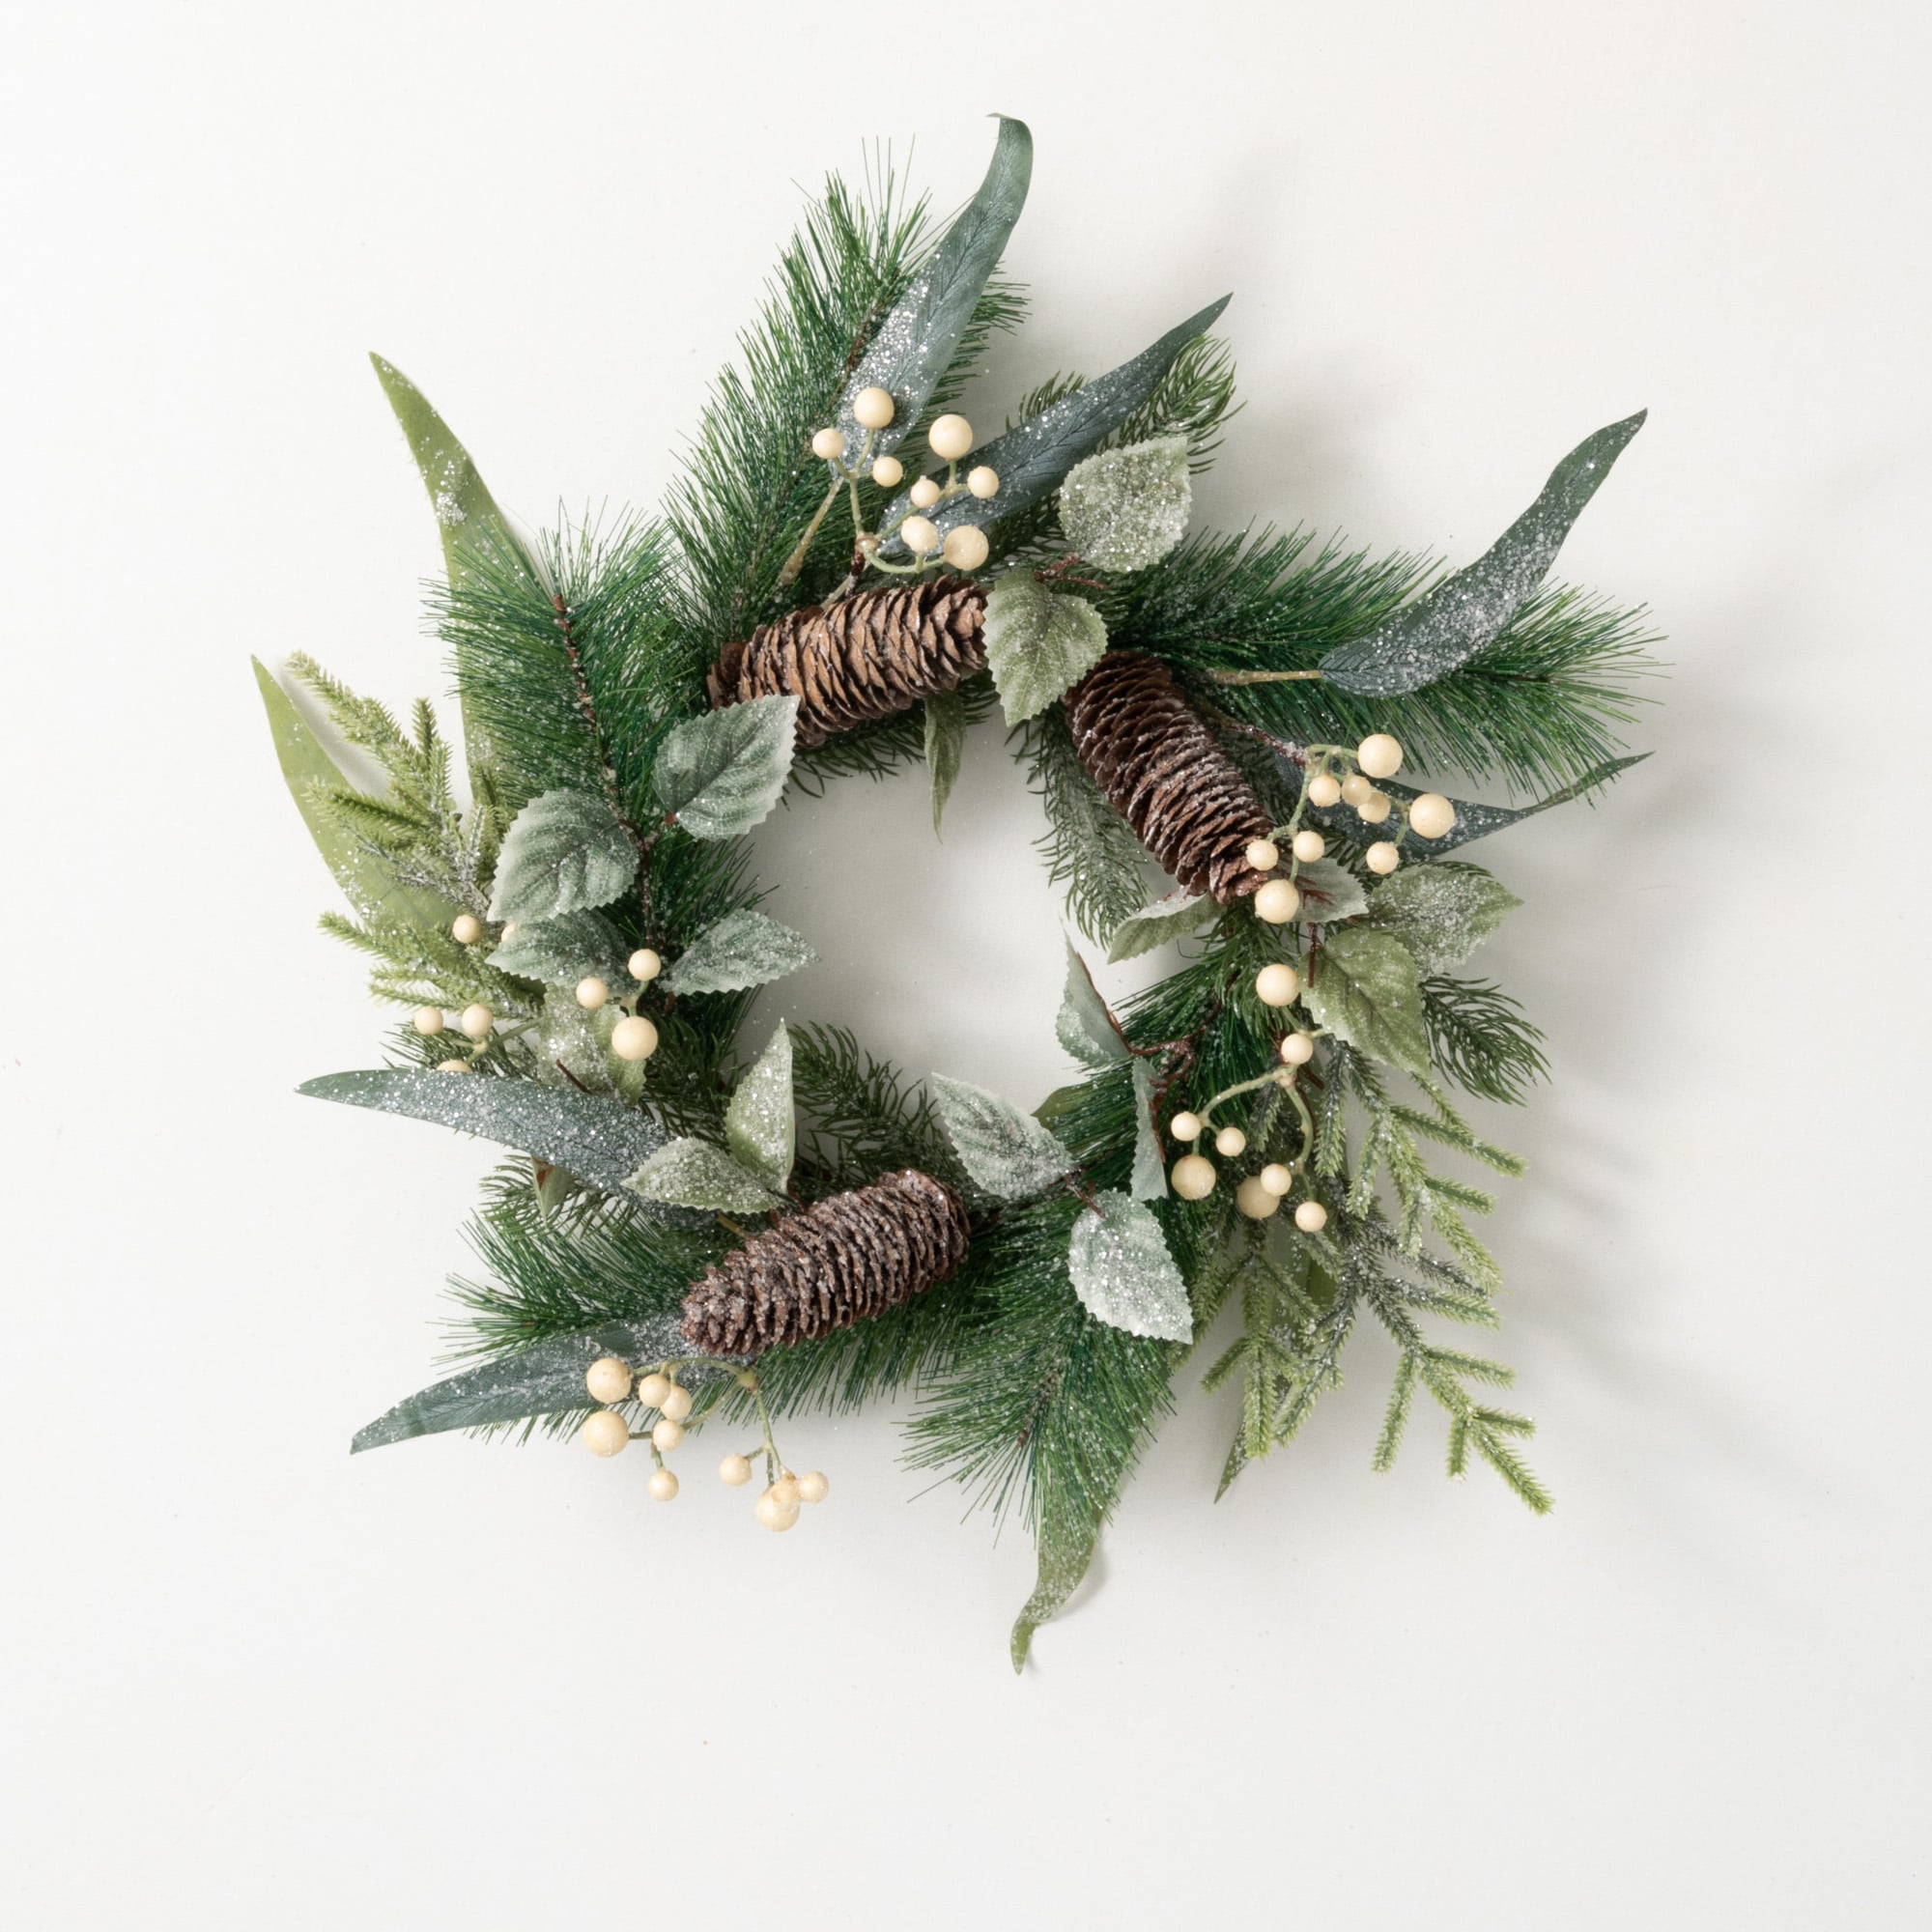 Artificial Christmas Wreaths at Lowes.com